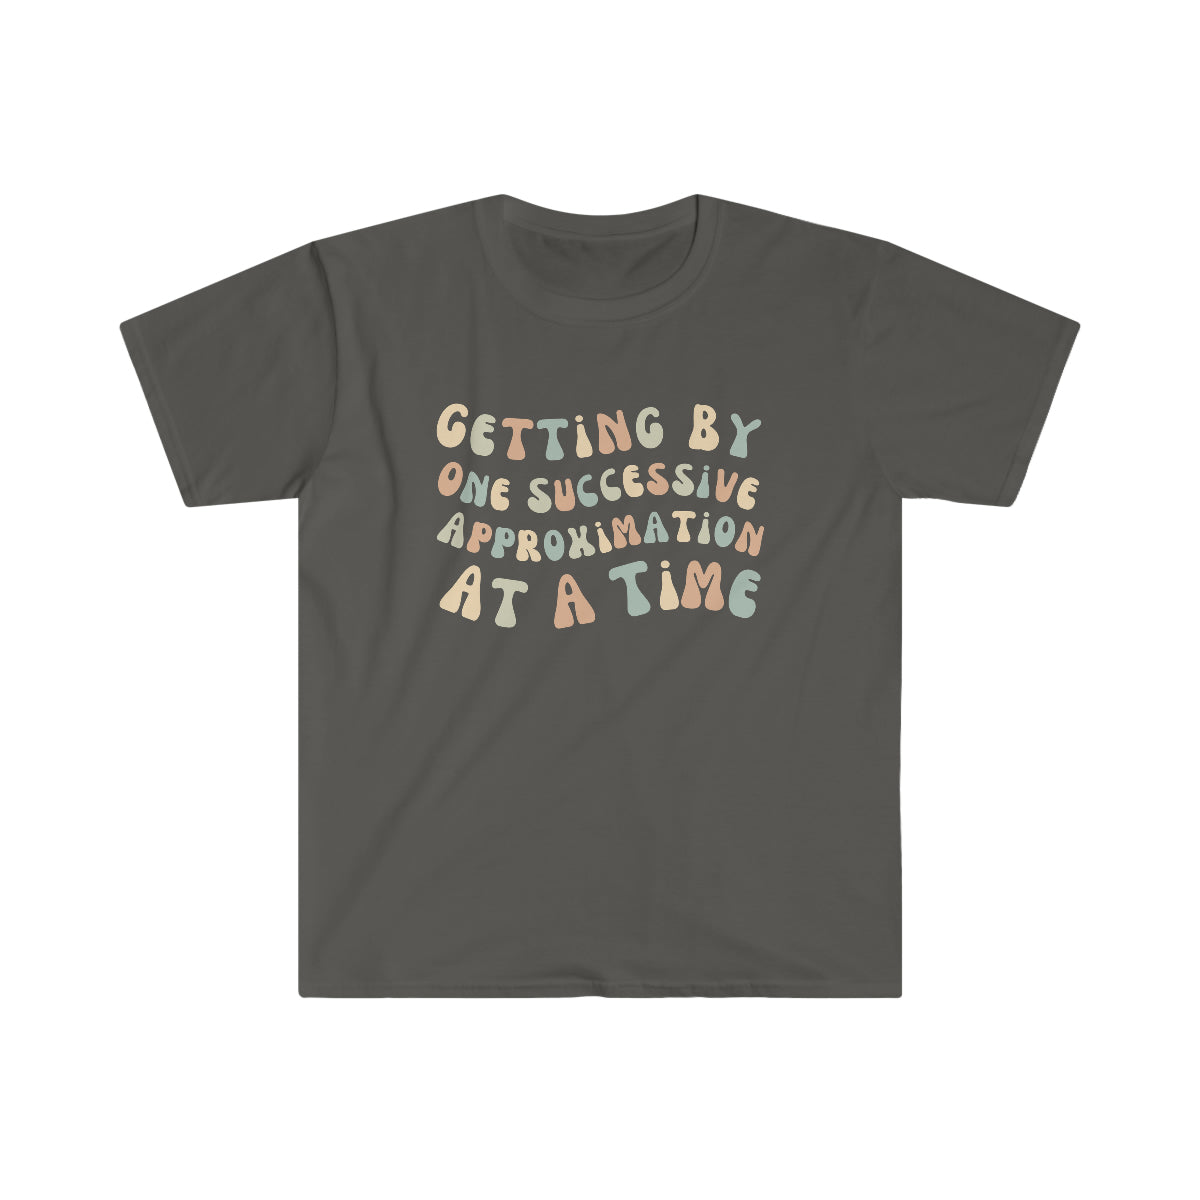 Getting by One Approximation at a Time #5 Shirt | Applied Behavior Analysis | Autism awareness | ABA Shirt | behavior analyst